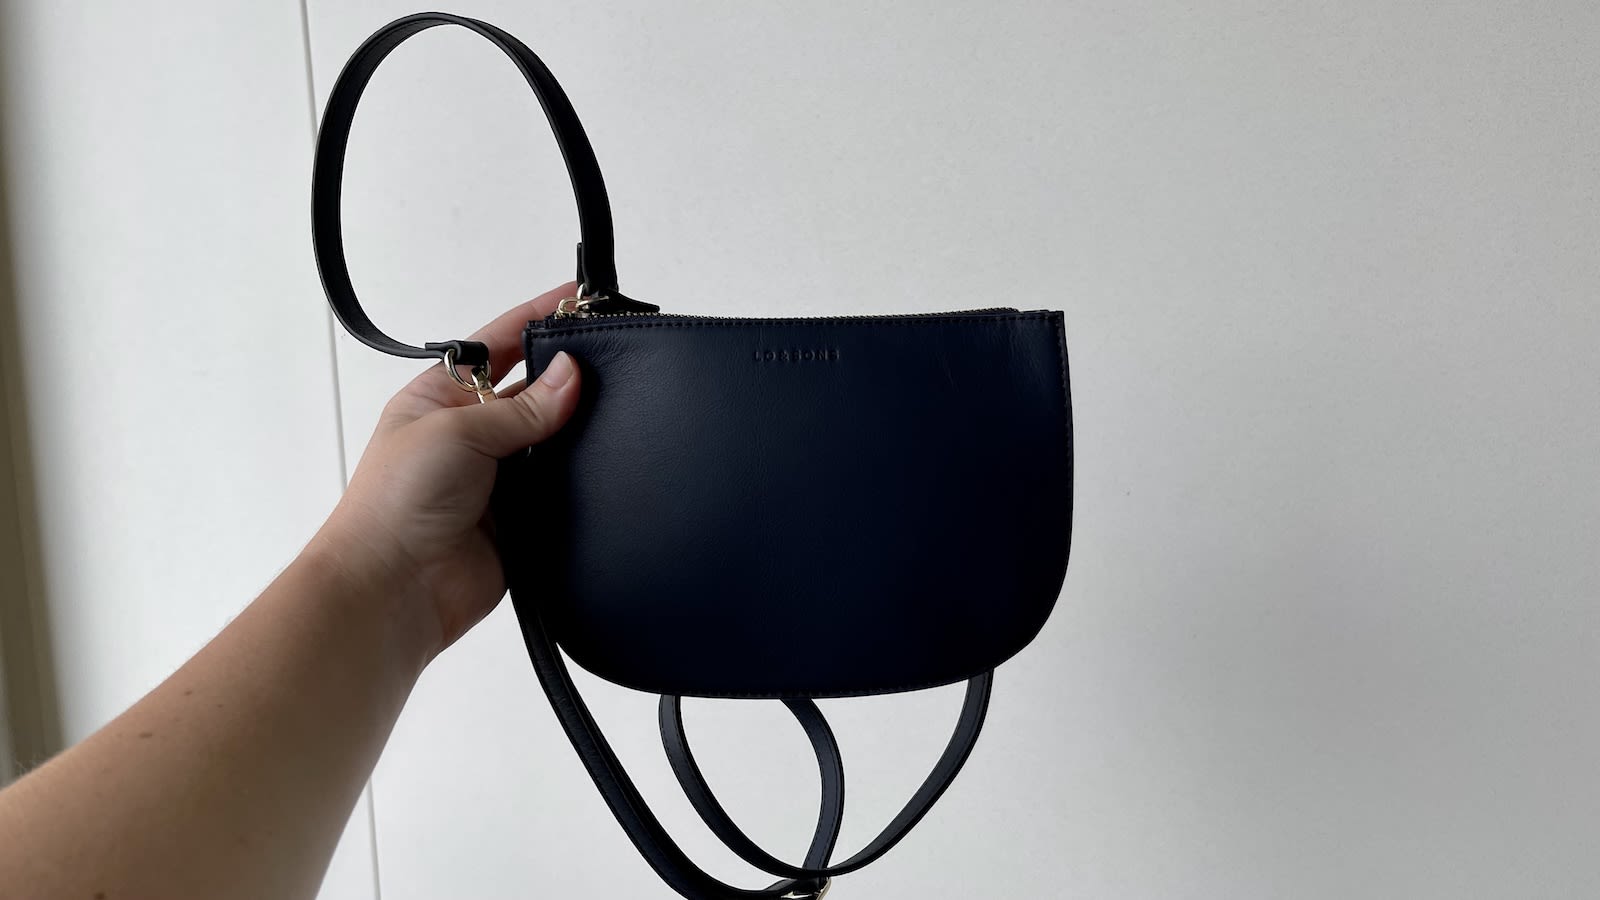 Lo & Sons - The Waverley's adjustable strap allows the bag